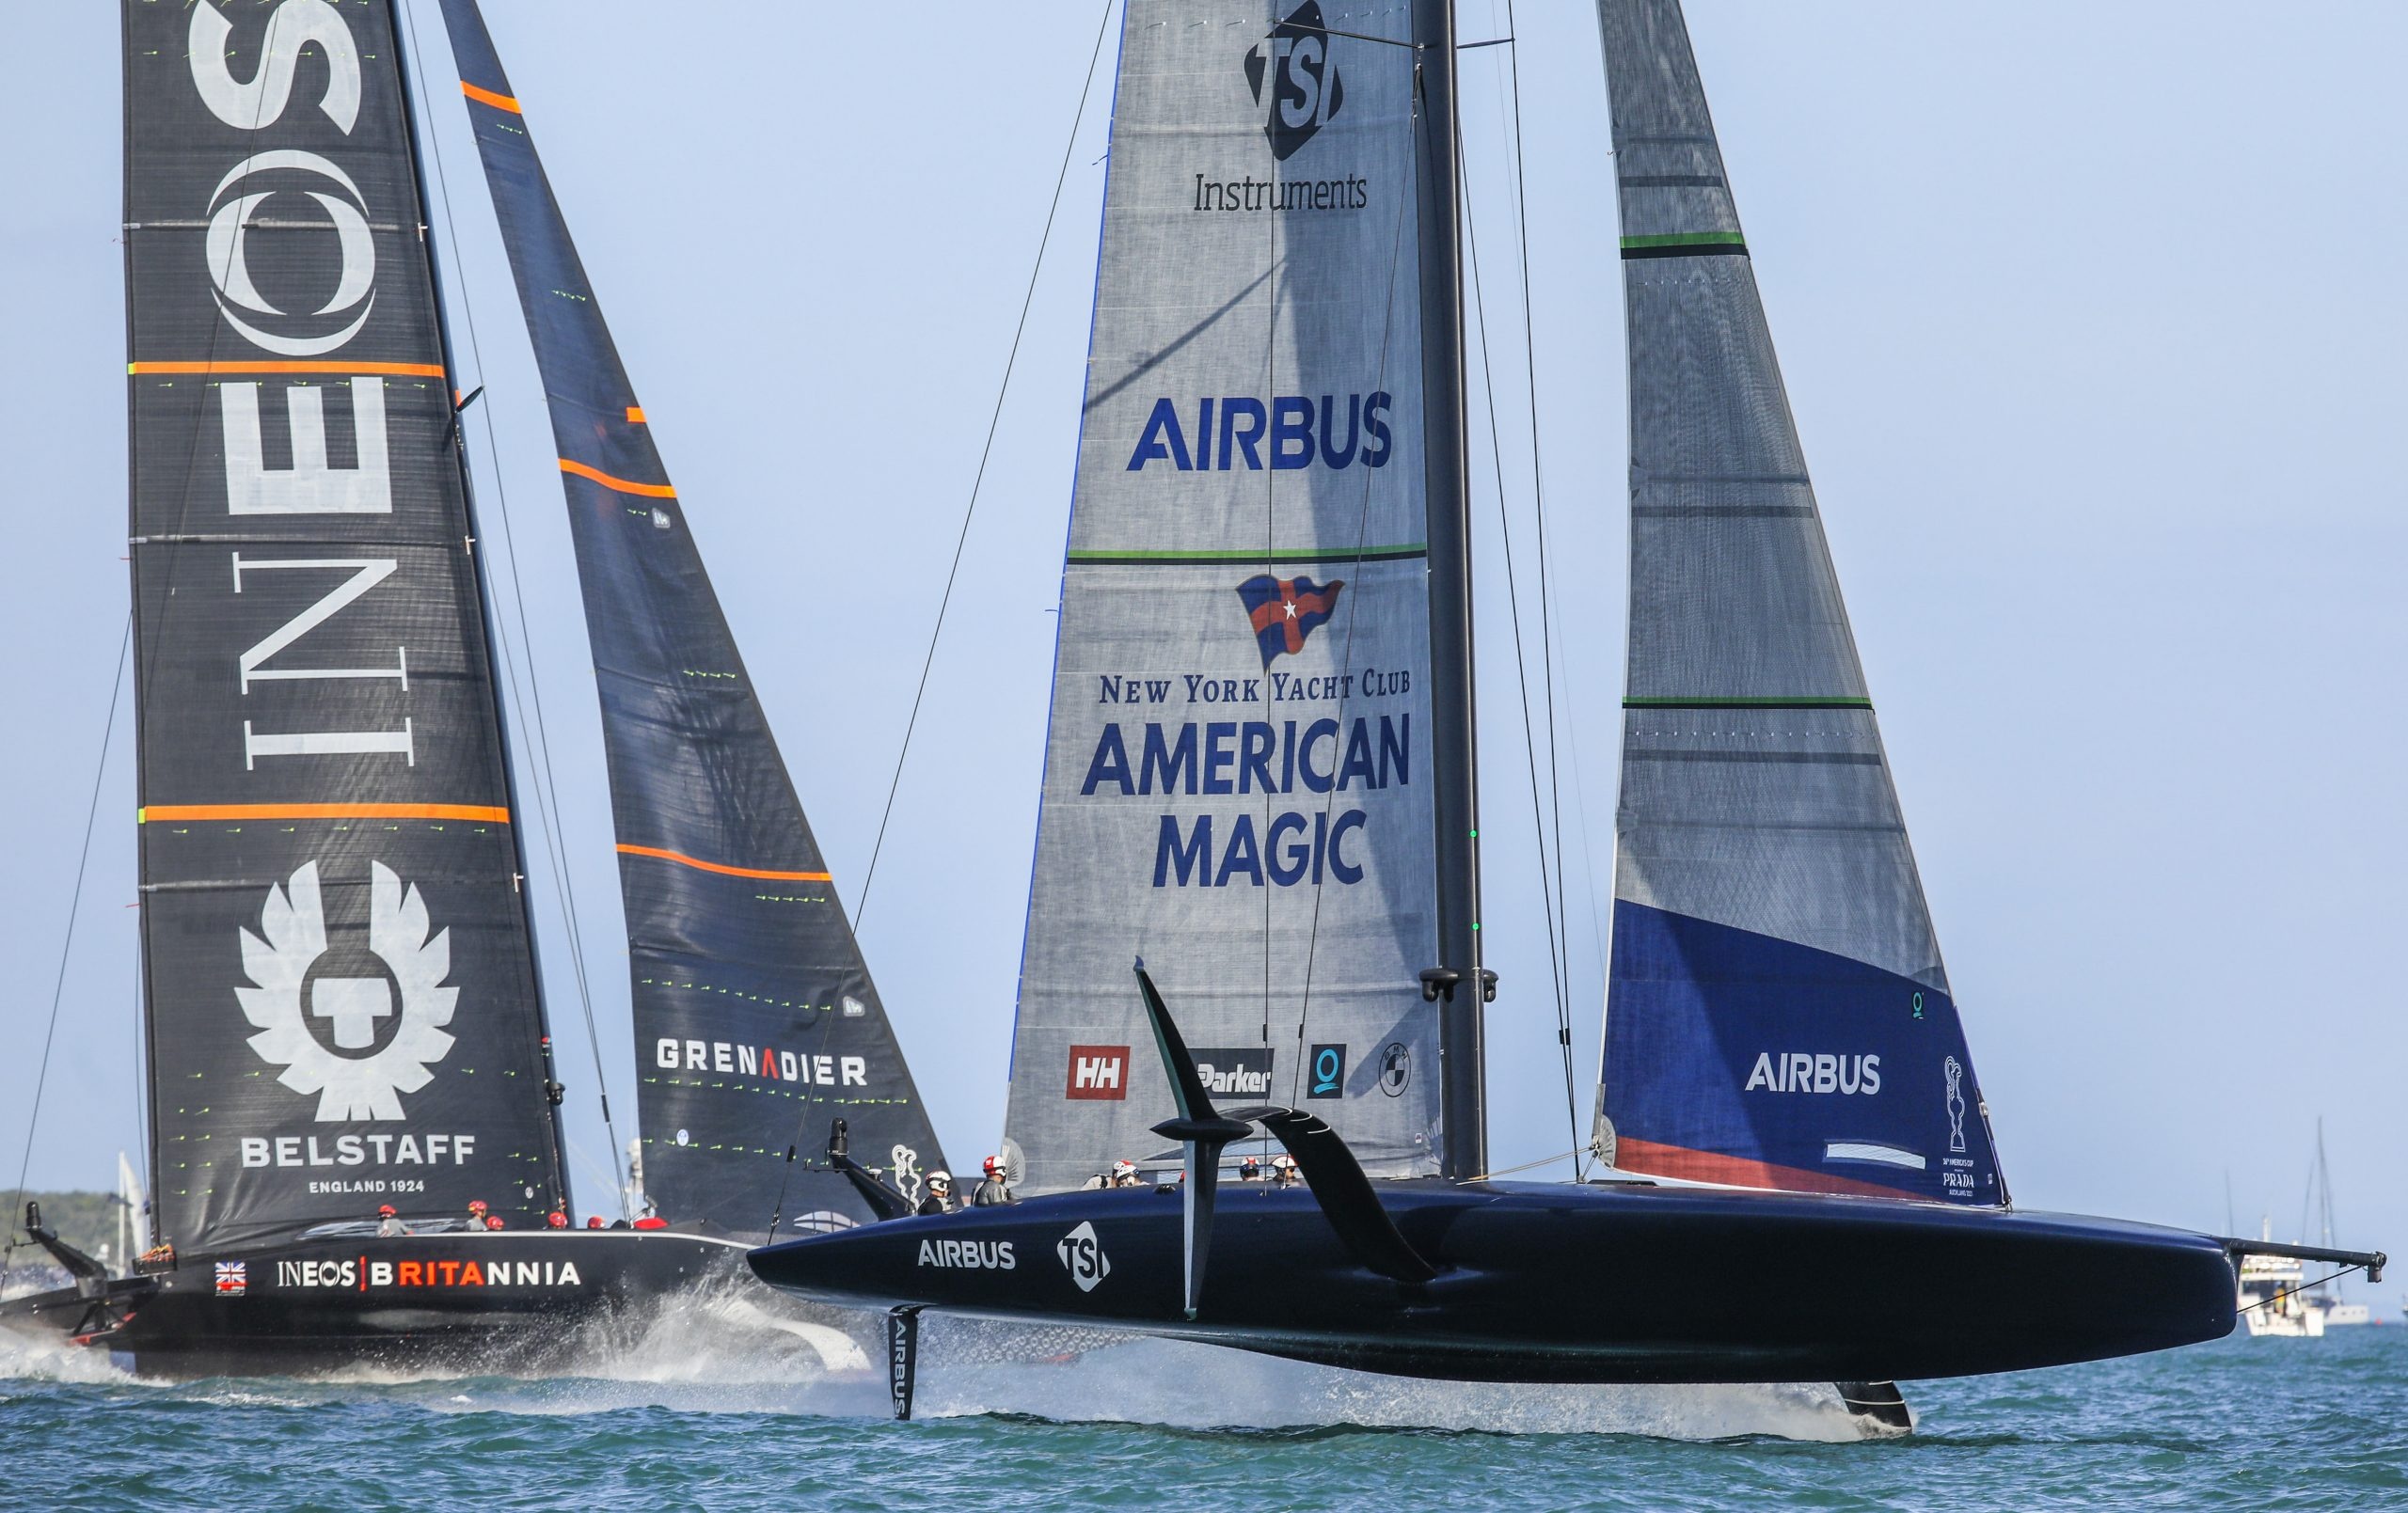 Yacht Racing: 36th America's Cup, New York Yacht Club, American Magic, Water competition event. 2560x1610 HD Background.